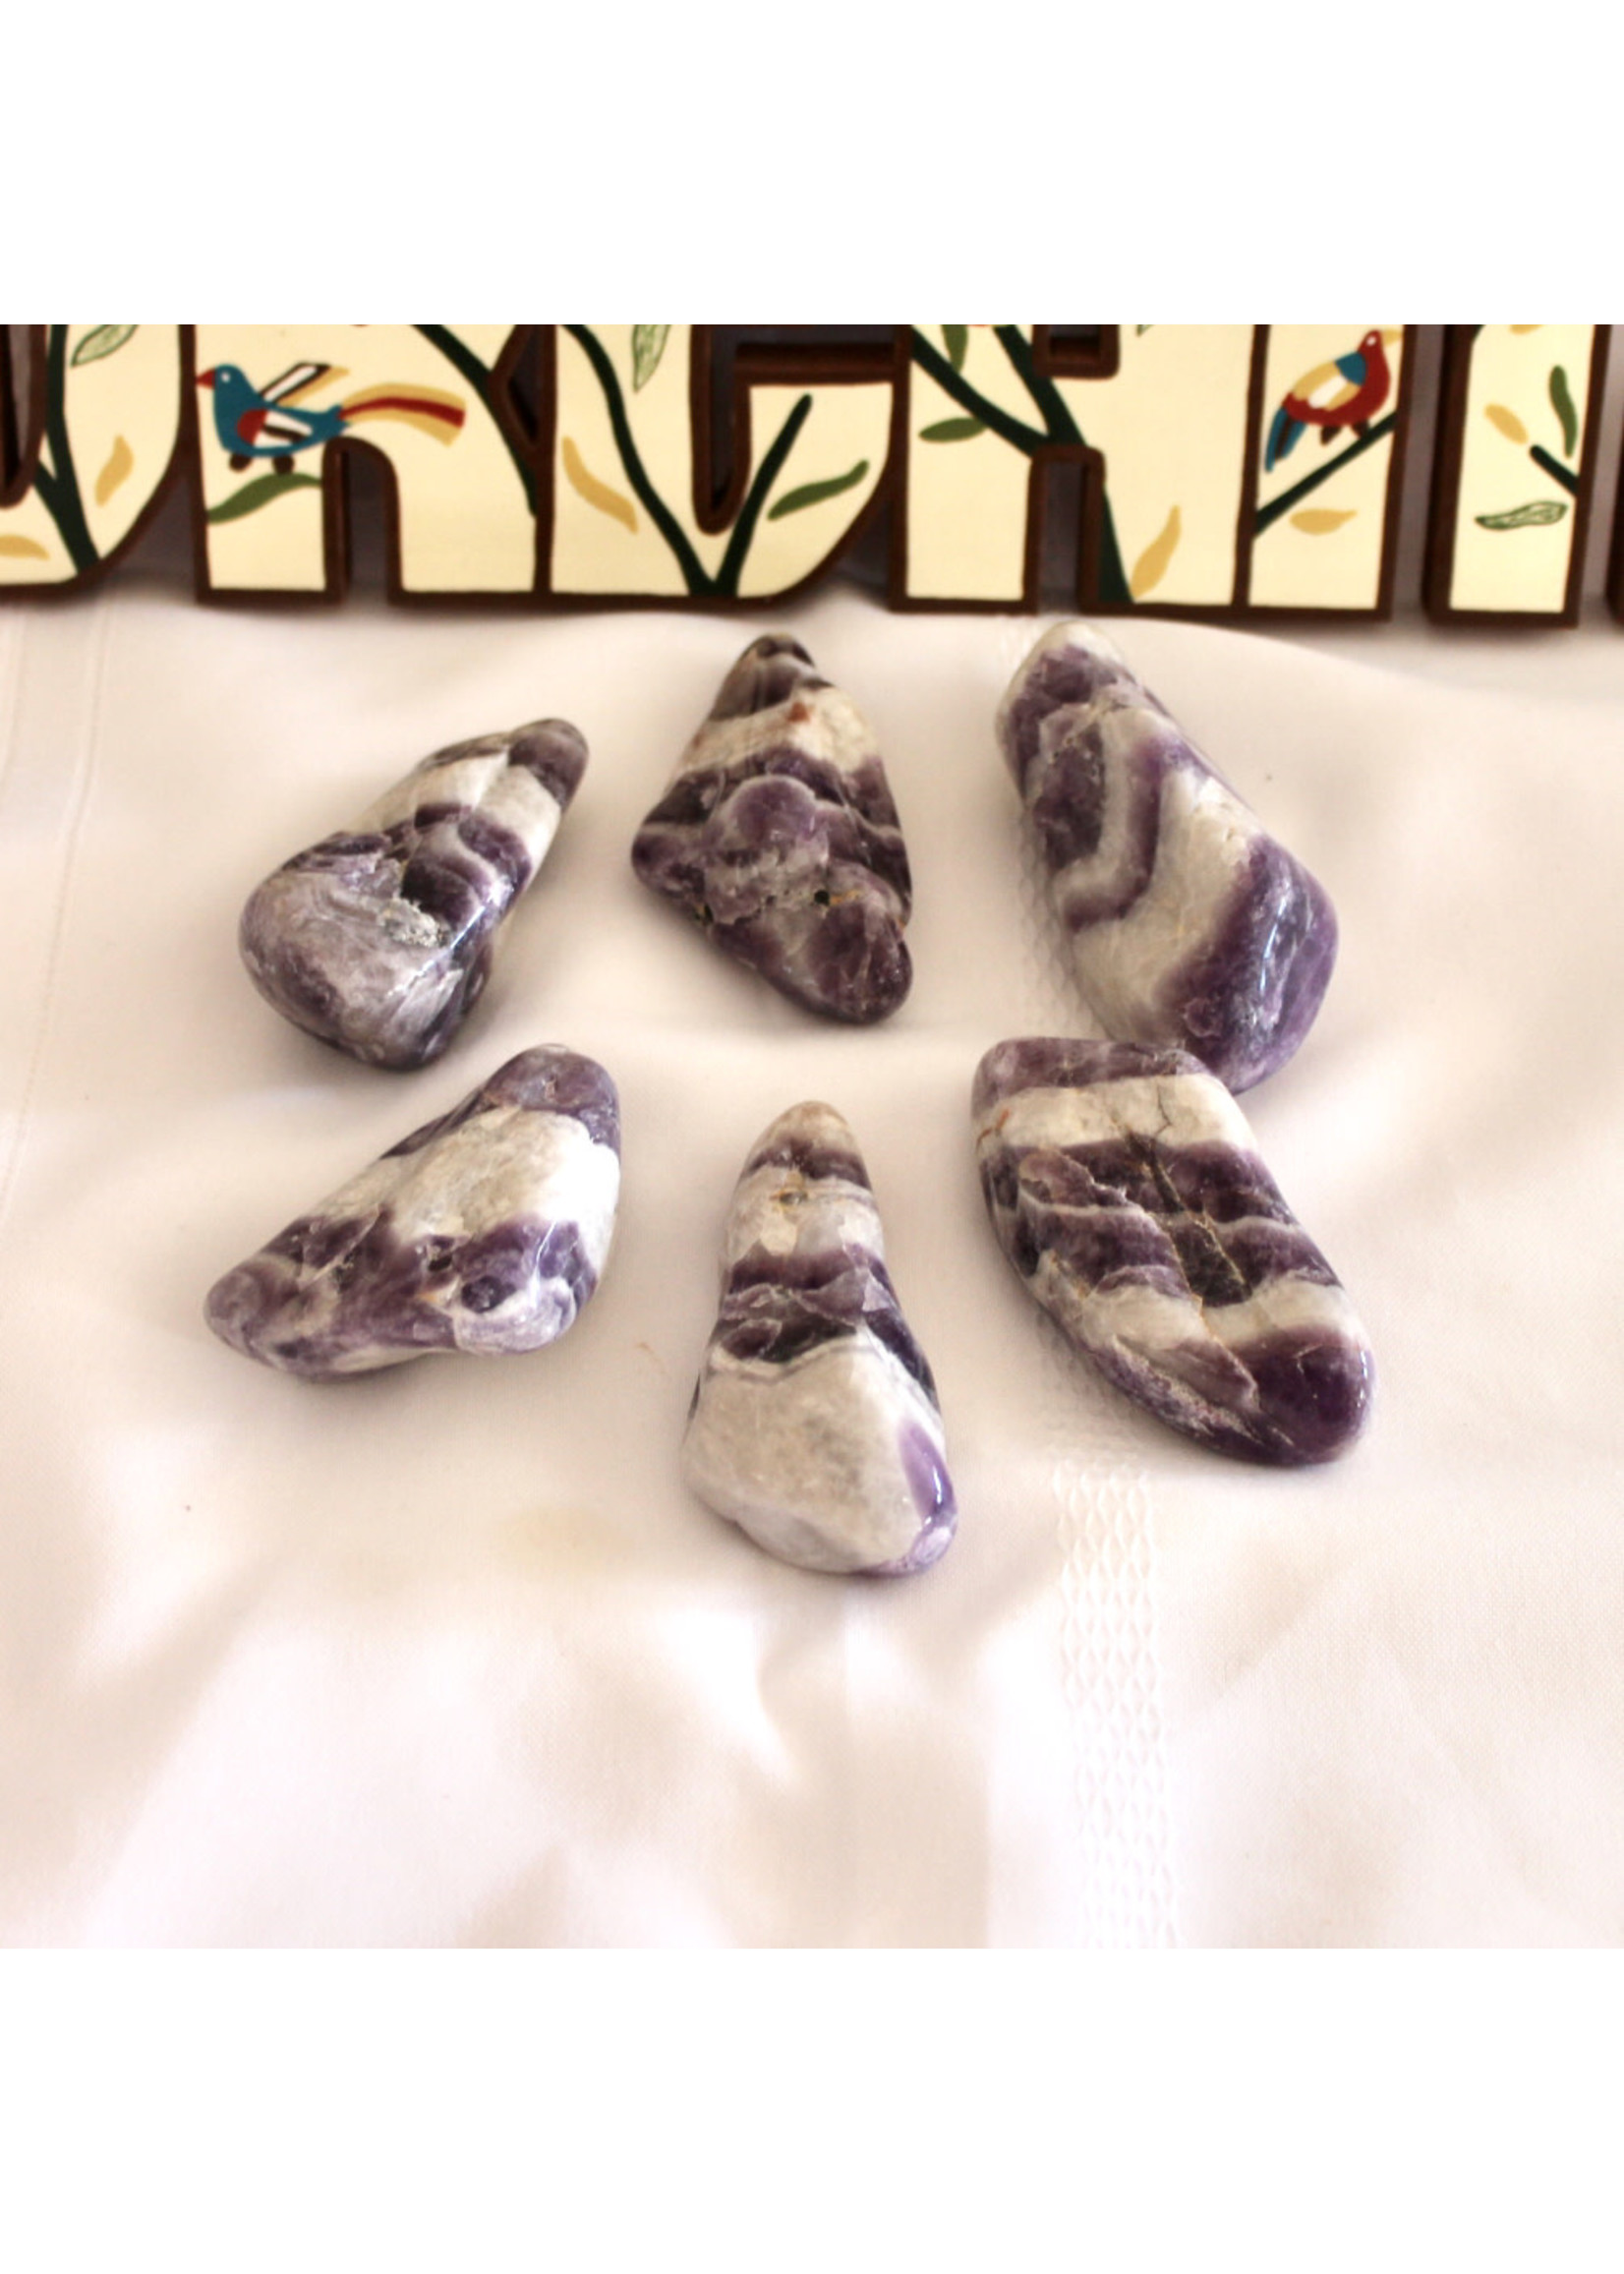 Chevron (Dream) Amethyst Polished for intuition